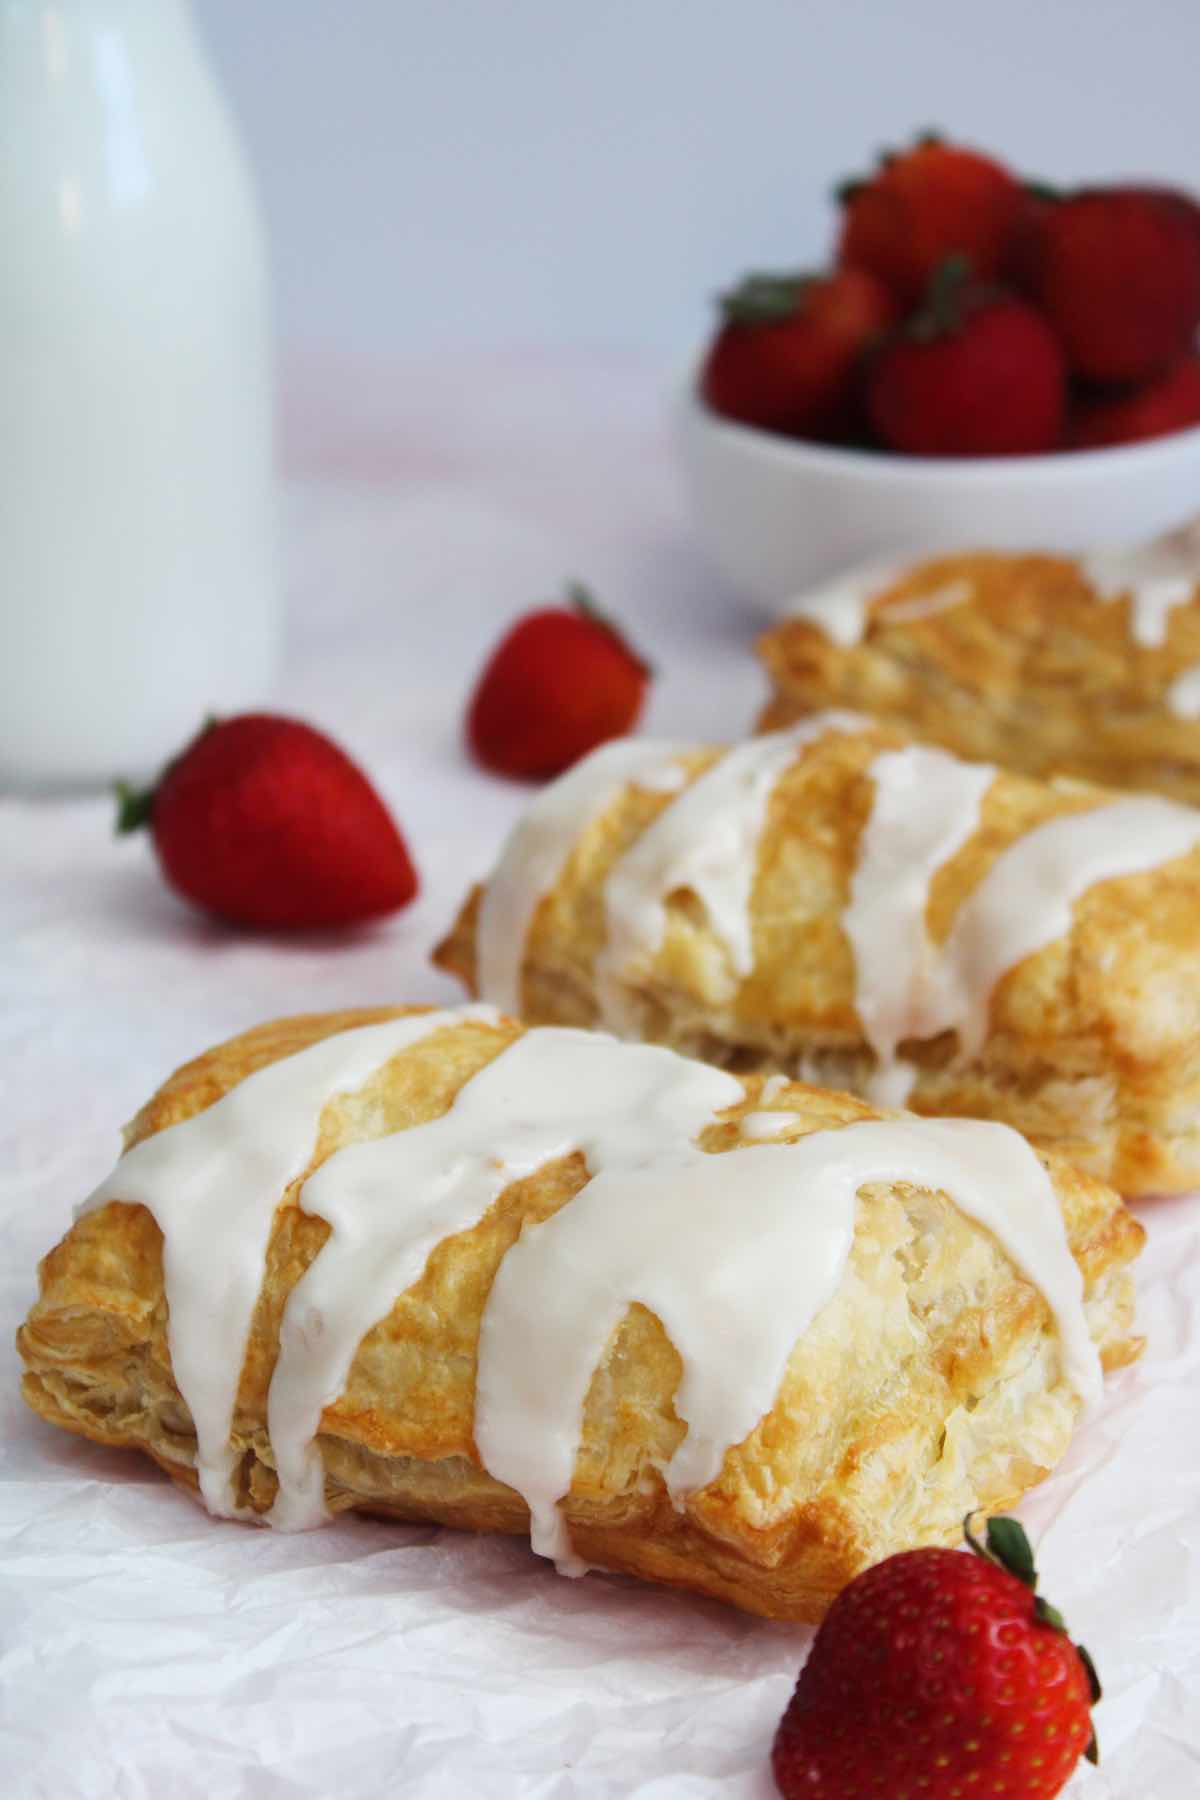 Homemade air fryer toaster strudel recipe with strawberry filling and vanilla icing.